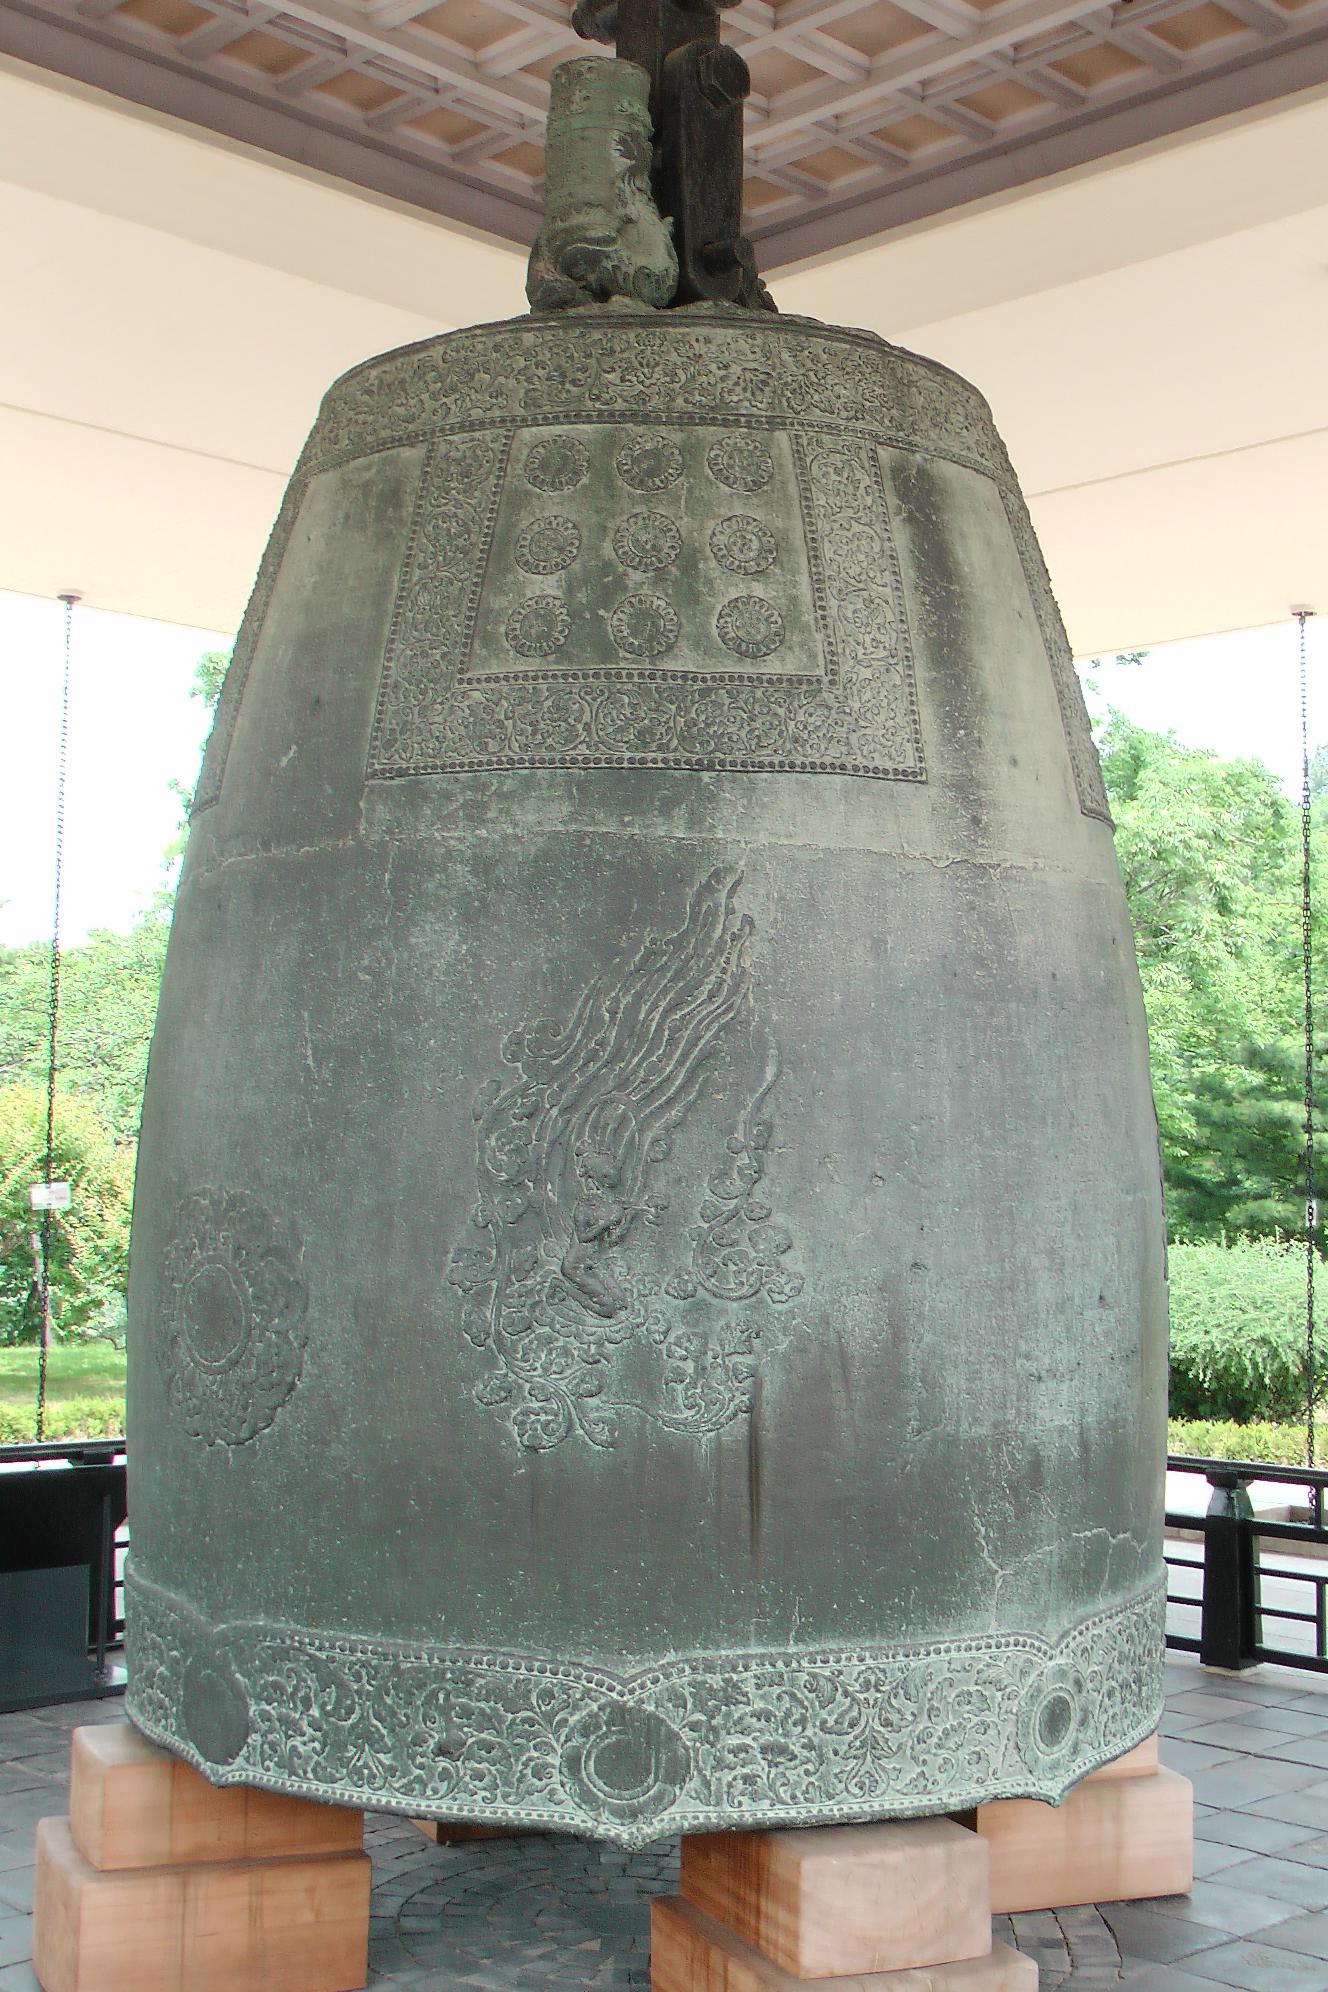 Dharma bell at the national museum